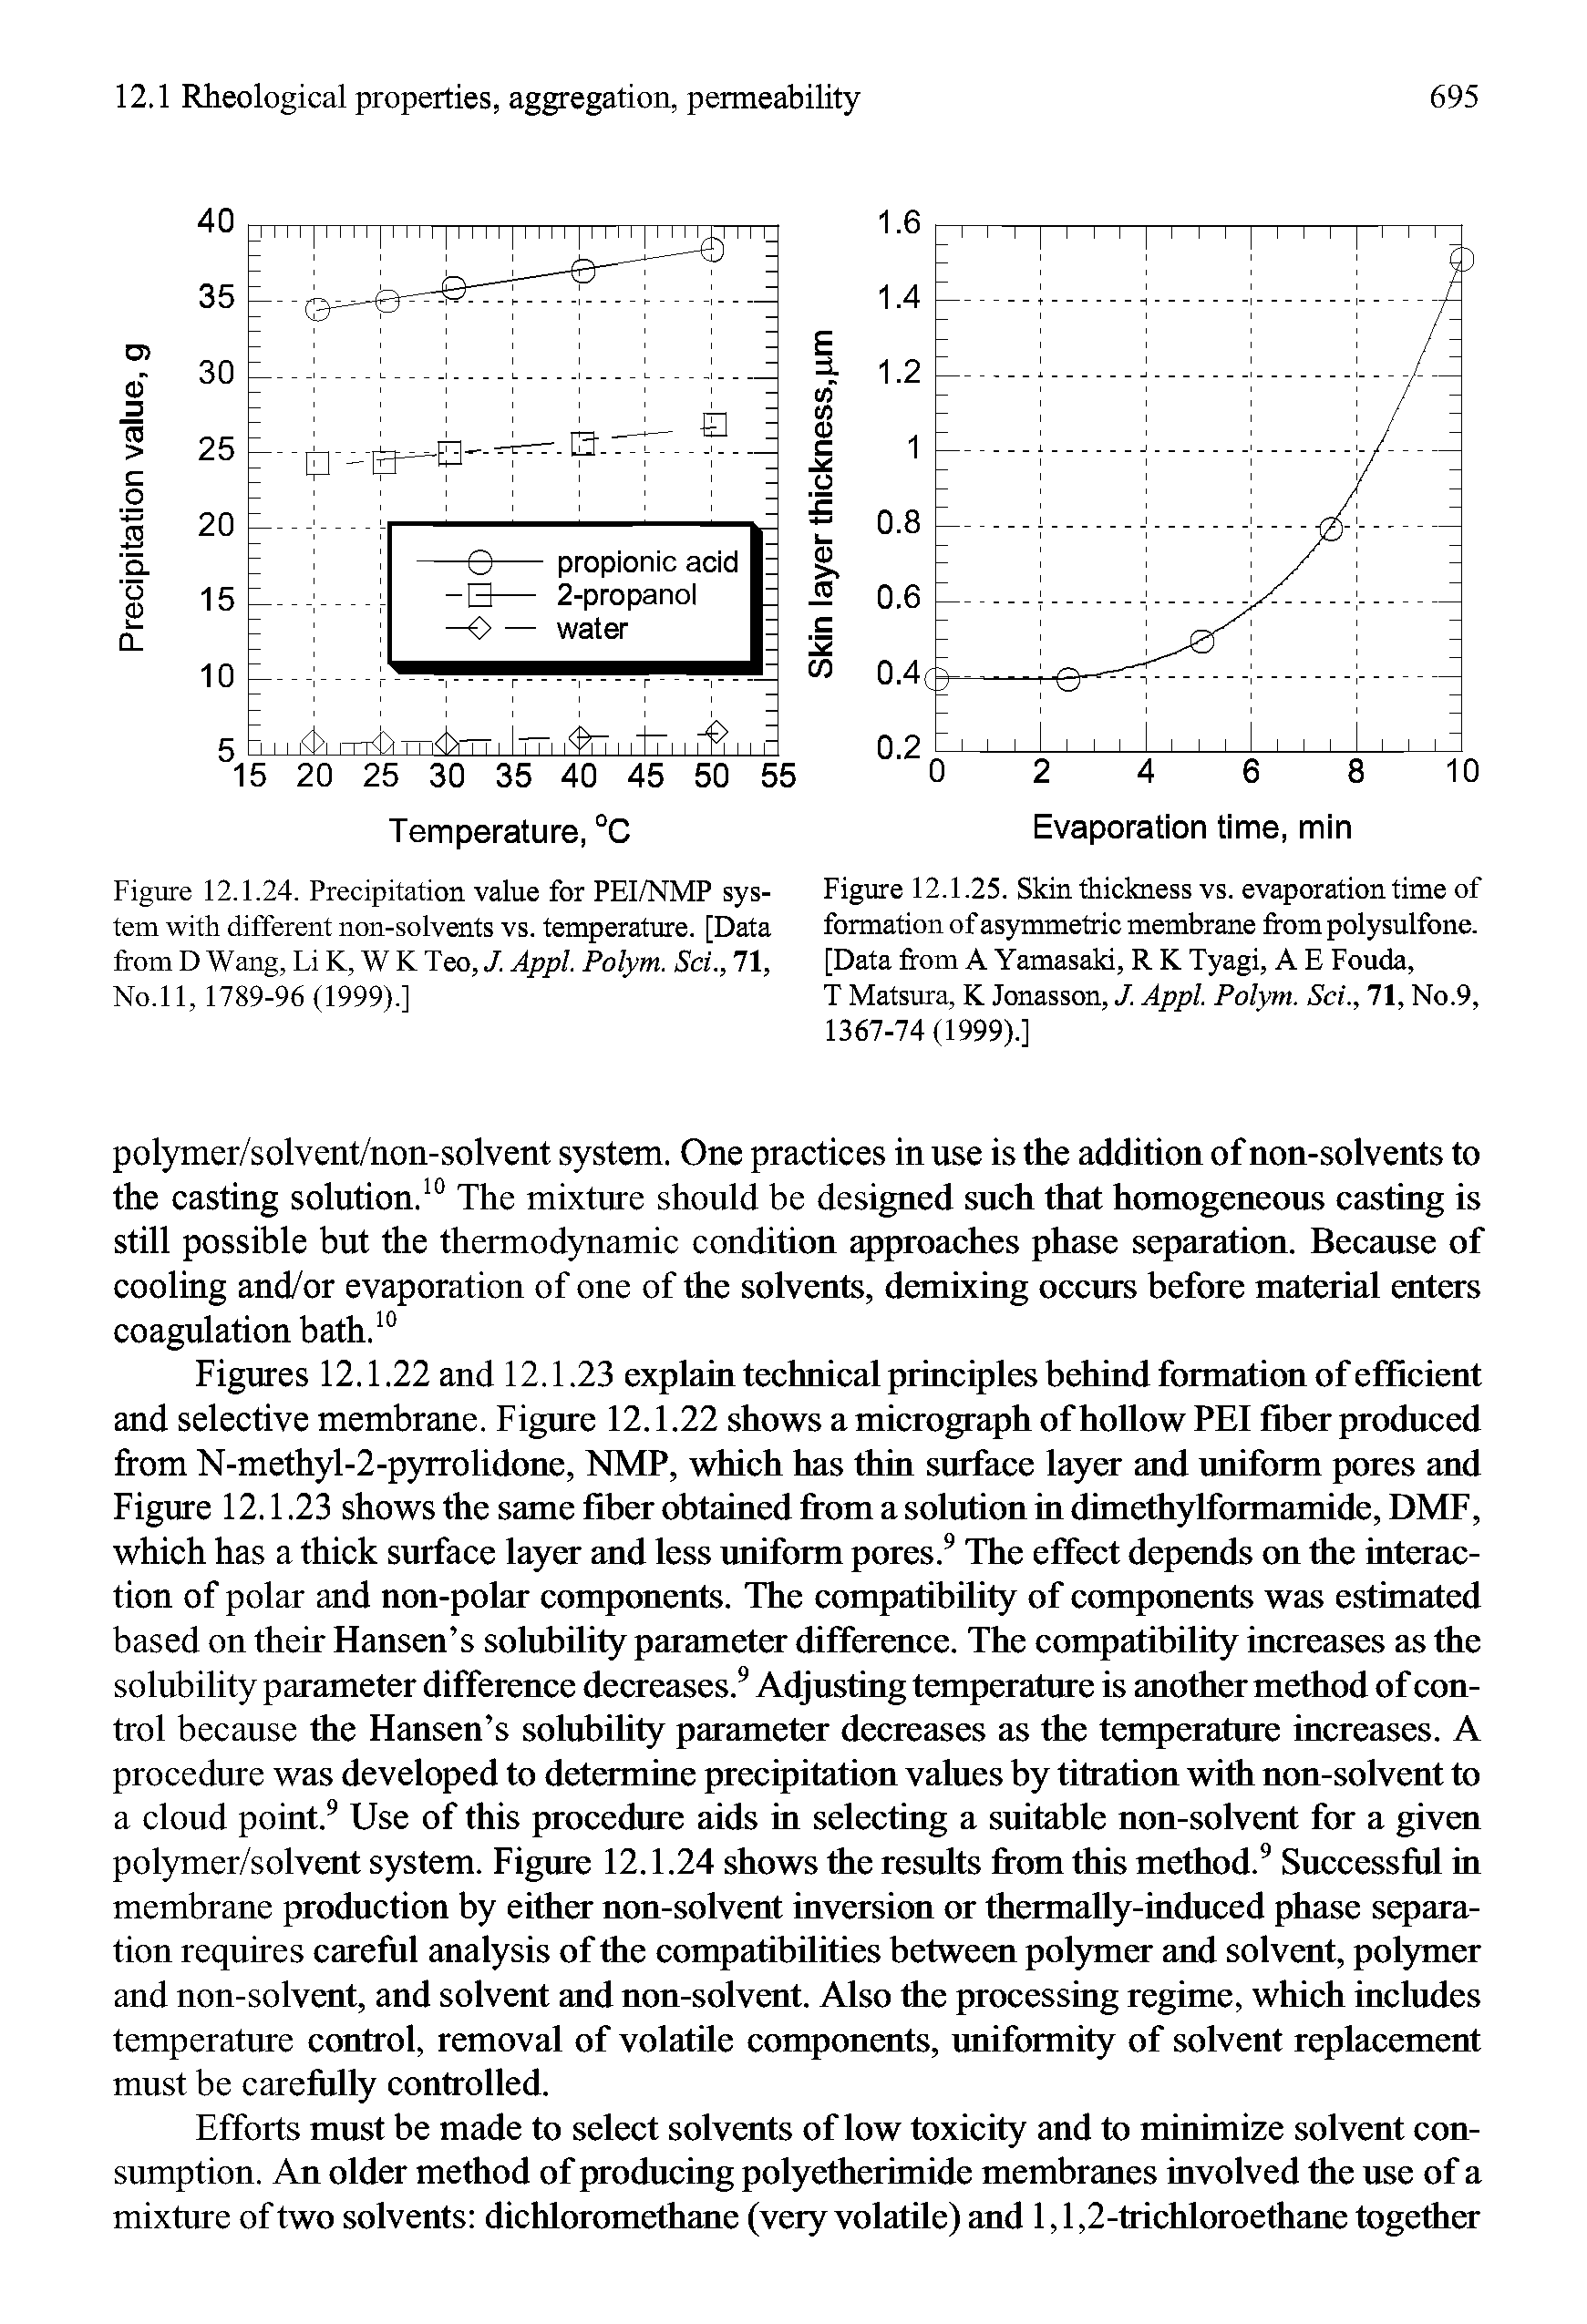 Figures 12.1.22 and 12.1.23 explain technical principles behind formation of efficient and selective membrane. Figure 12.1.22 shows a micrograph of hollow PEI fiber produced from N-methyl-2-pyrrolidone, NMP, which has thin surface layer and uniform pores and Figure 12.1.23 shows the same fiber obtained from a solution in dimethylformamide, DMF, which has a thick surface layer and less uniform pores. The effect depends on the interaction of polar and non-polar components. The compatibility of components was estimated based on their Hansen s solubility parameter difference. The compatibility increases as the solubility parameter difference decreases. Adjusting temperature is another method of control because the Hansen s solubility parameter decreases as the temperature increases. A procedure was developed to determine precipitation values by titration with non-solvent to a cloud point. Use of this procedure aids in selecting a suitable non-solvent for a given polymer/solvent system. Figure 12.1.24 shows the results from this method. Successfid in membrane production by either non-solvent inversion or thermally-induced phase separation requires careful analysis of the compatibilities between polymer and solvent, polymer and non-solvent, and solvent and non-solvent. Also the processing regime, which includes temperature control, removal of volatile components, uniformity of solvent replacement must be carefully controlled.